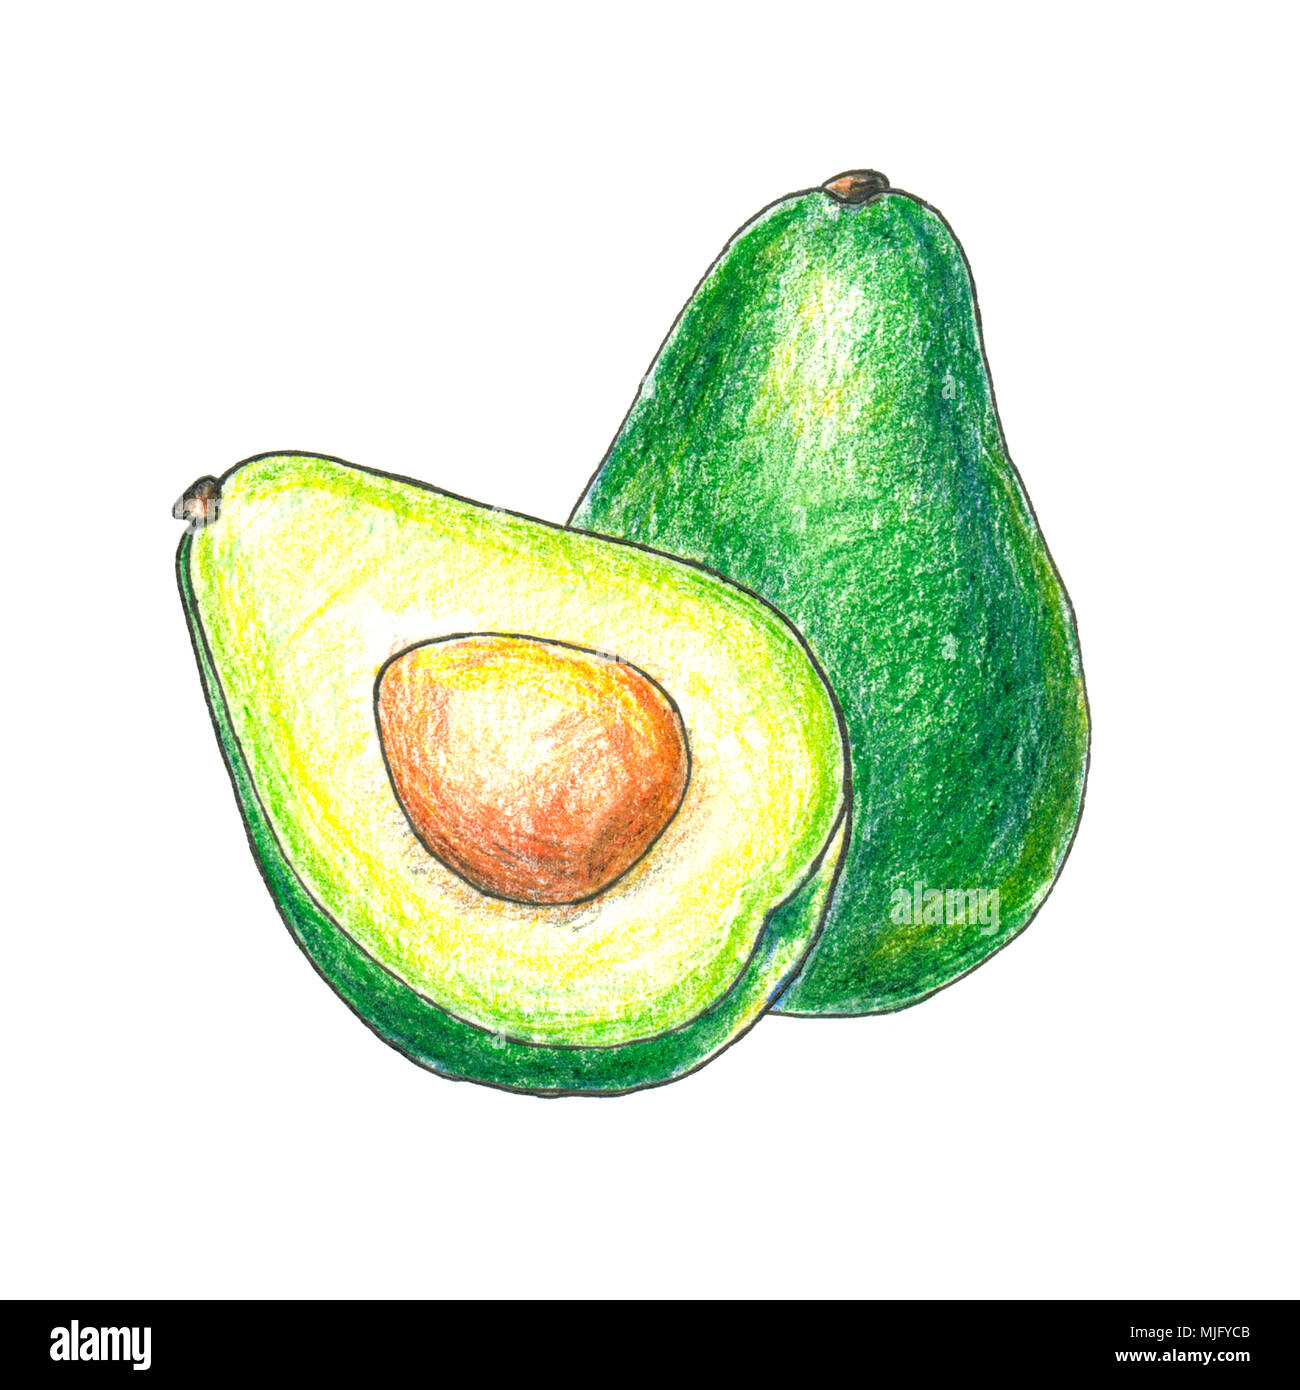 The illustration of avocado fruit. This is hand drawn illustration. Stock Photo